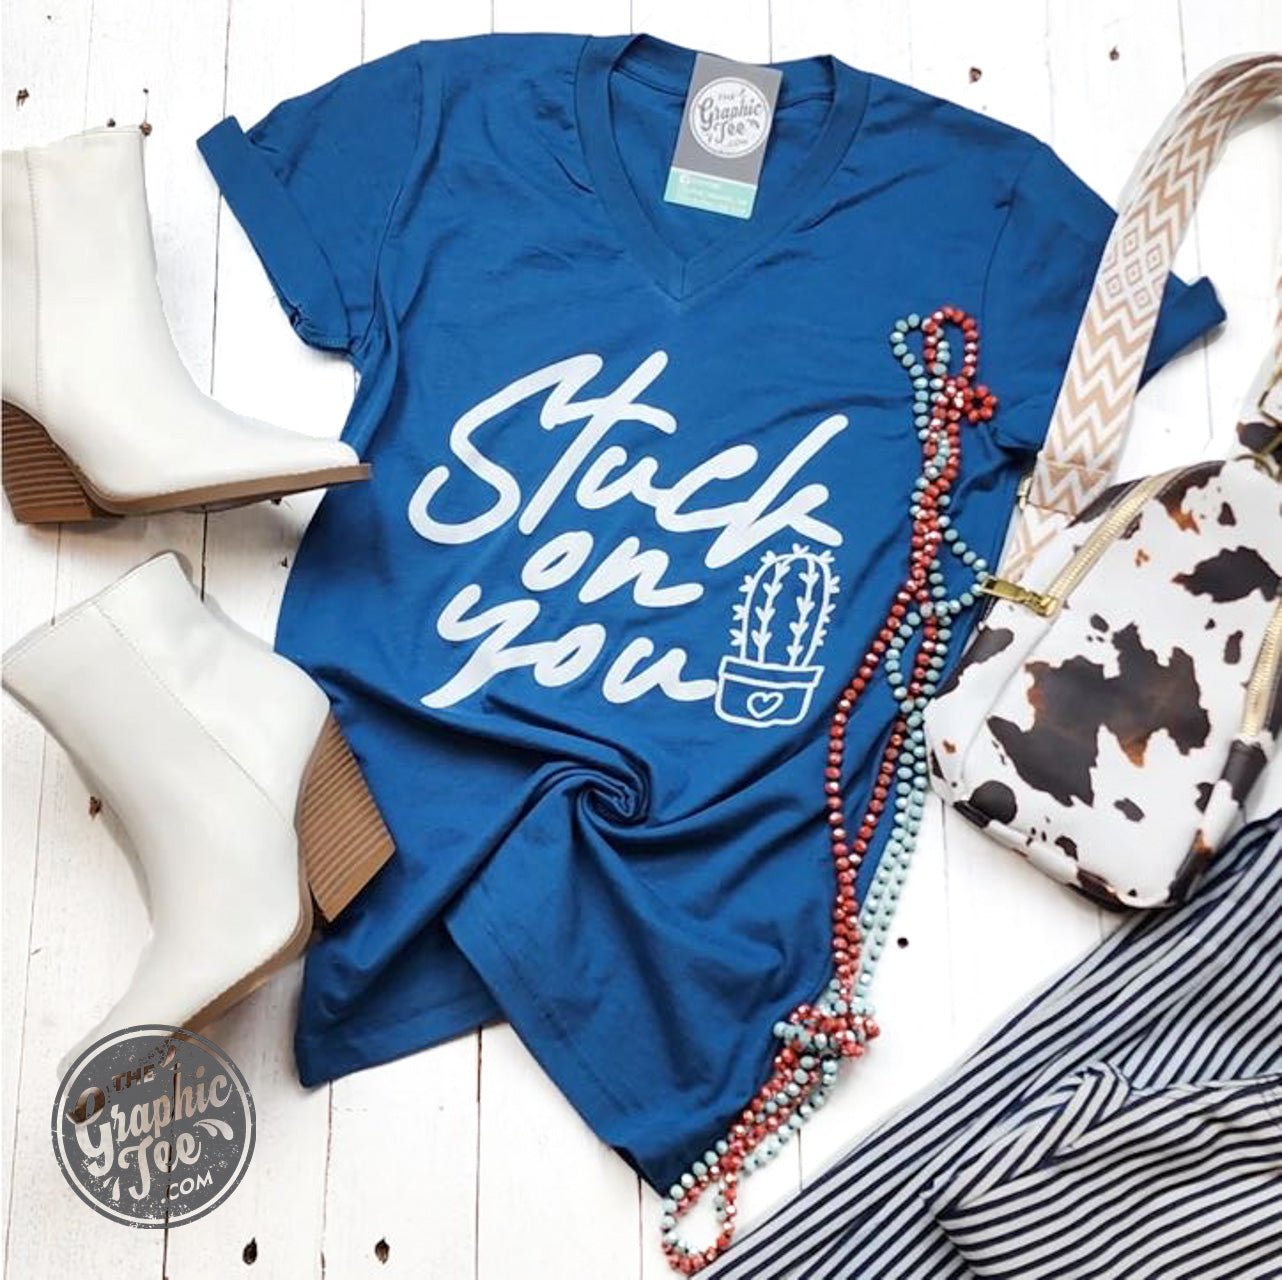 Stuck On You Deep Teal V-Neck Short Sleeve Tee - The Graphic Tee